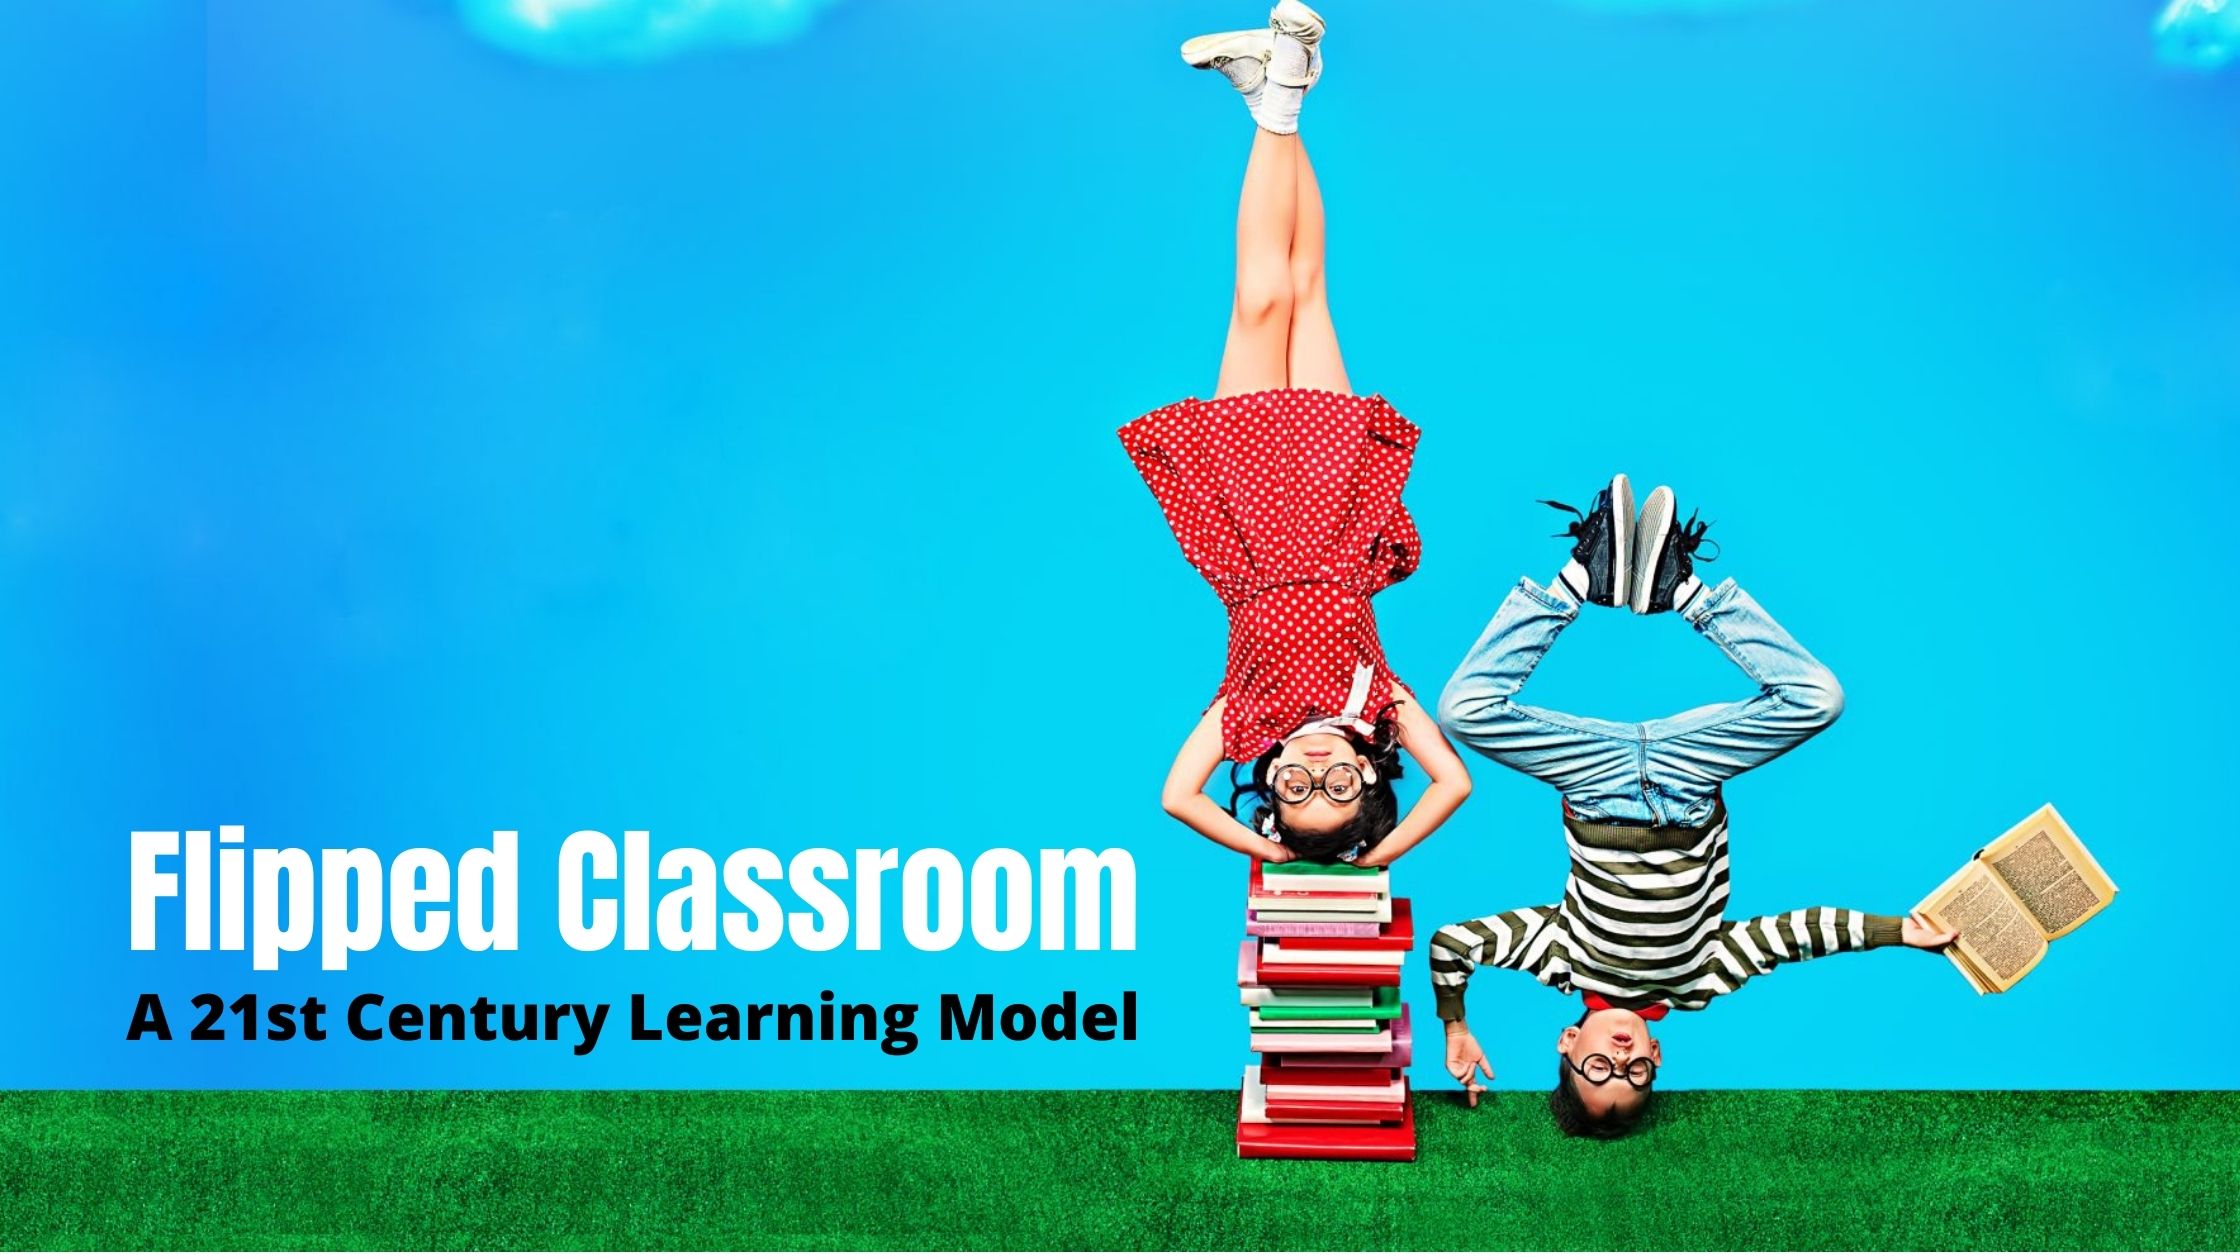 Flipped C;assrooms - A 21st Century Learning Model